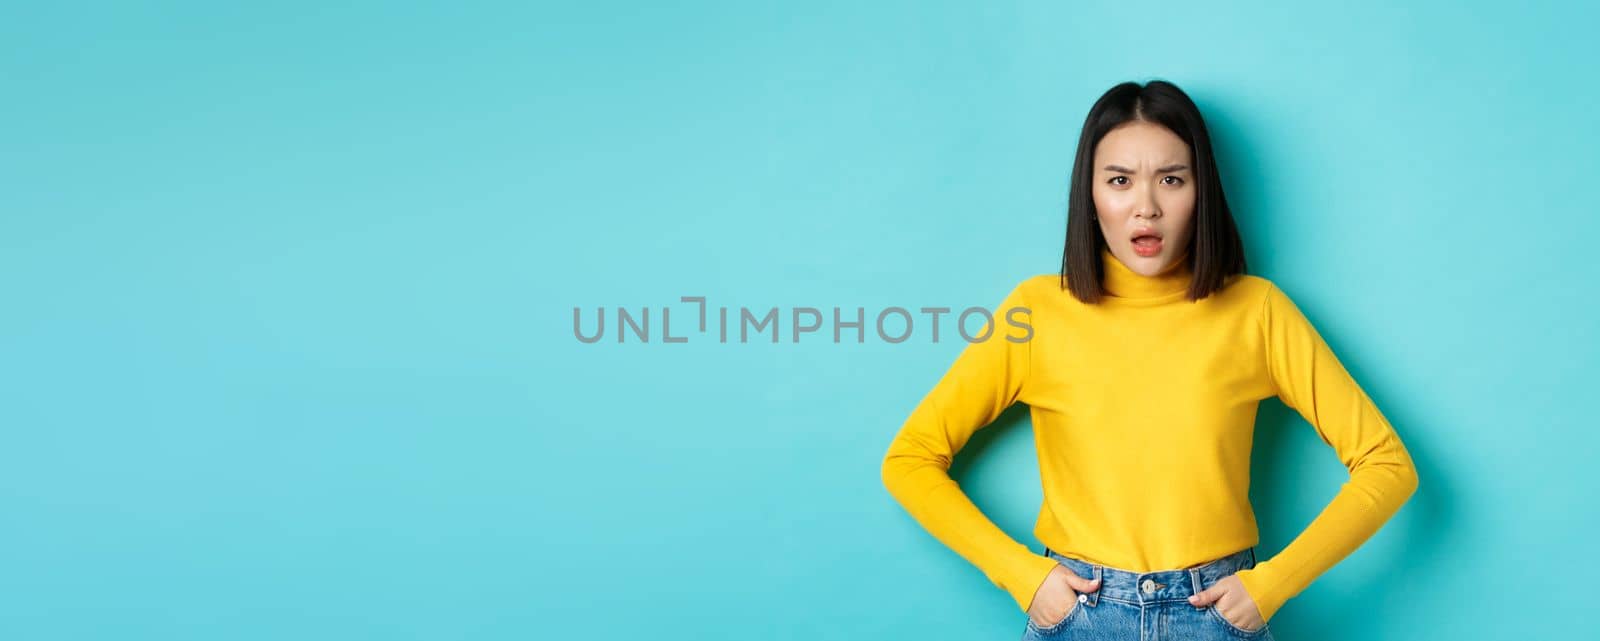 Portrait of disappointed korean woman in yellow sweater, frowning and looking upset, standing over blue background.